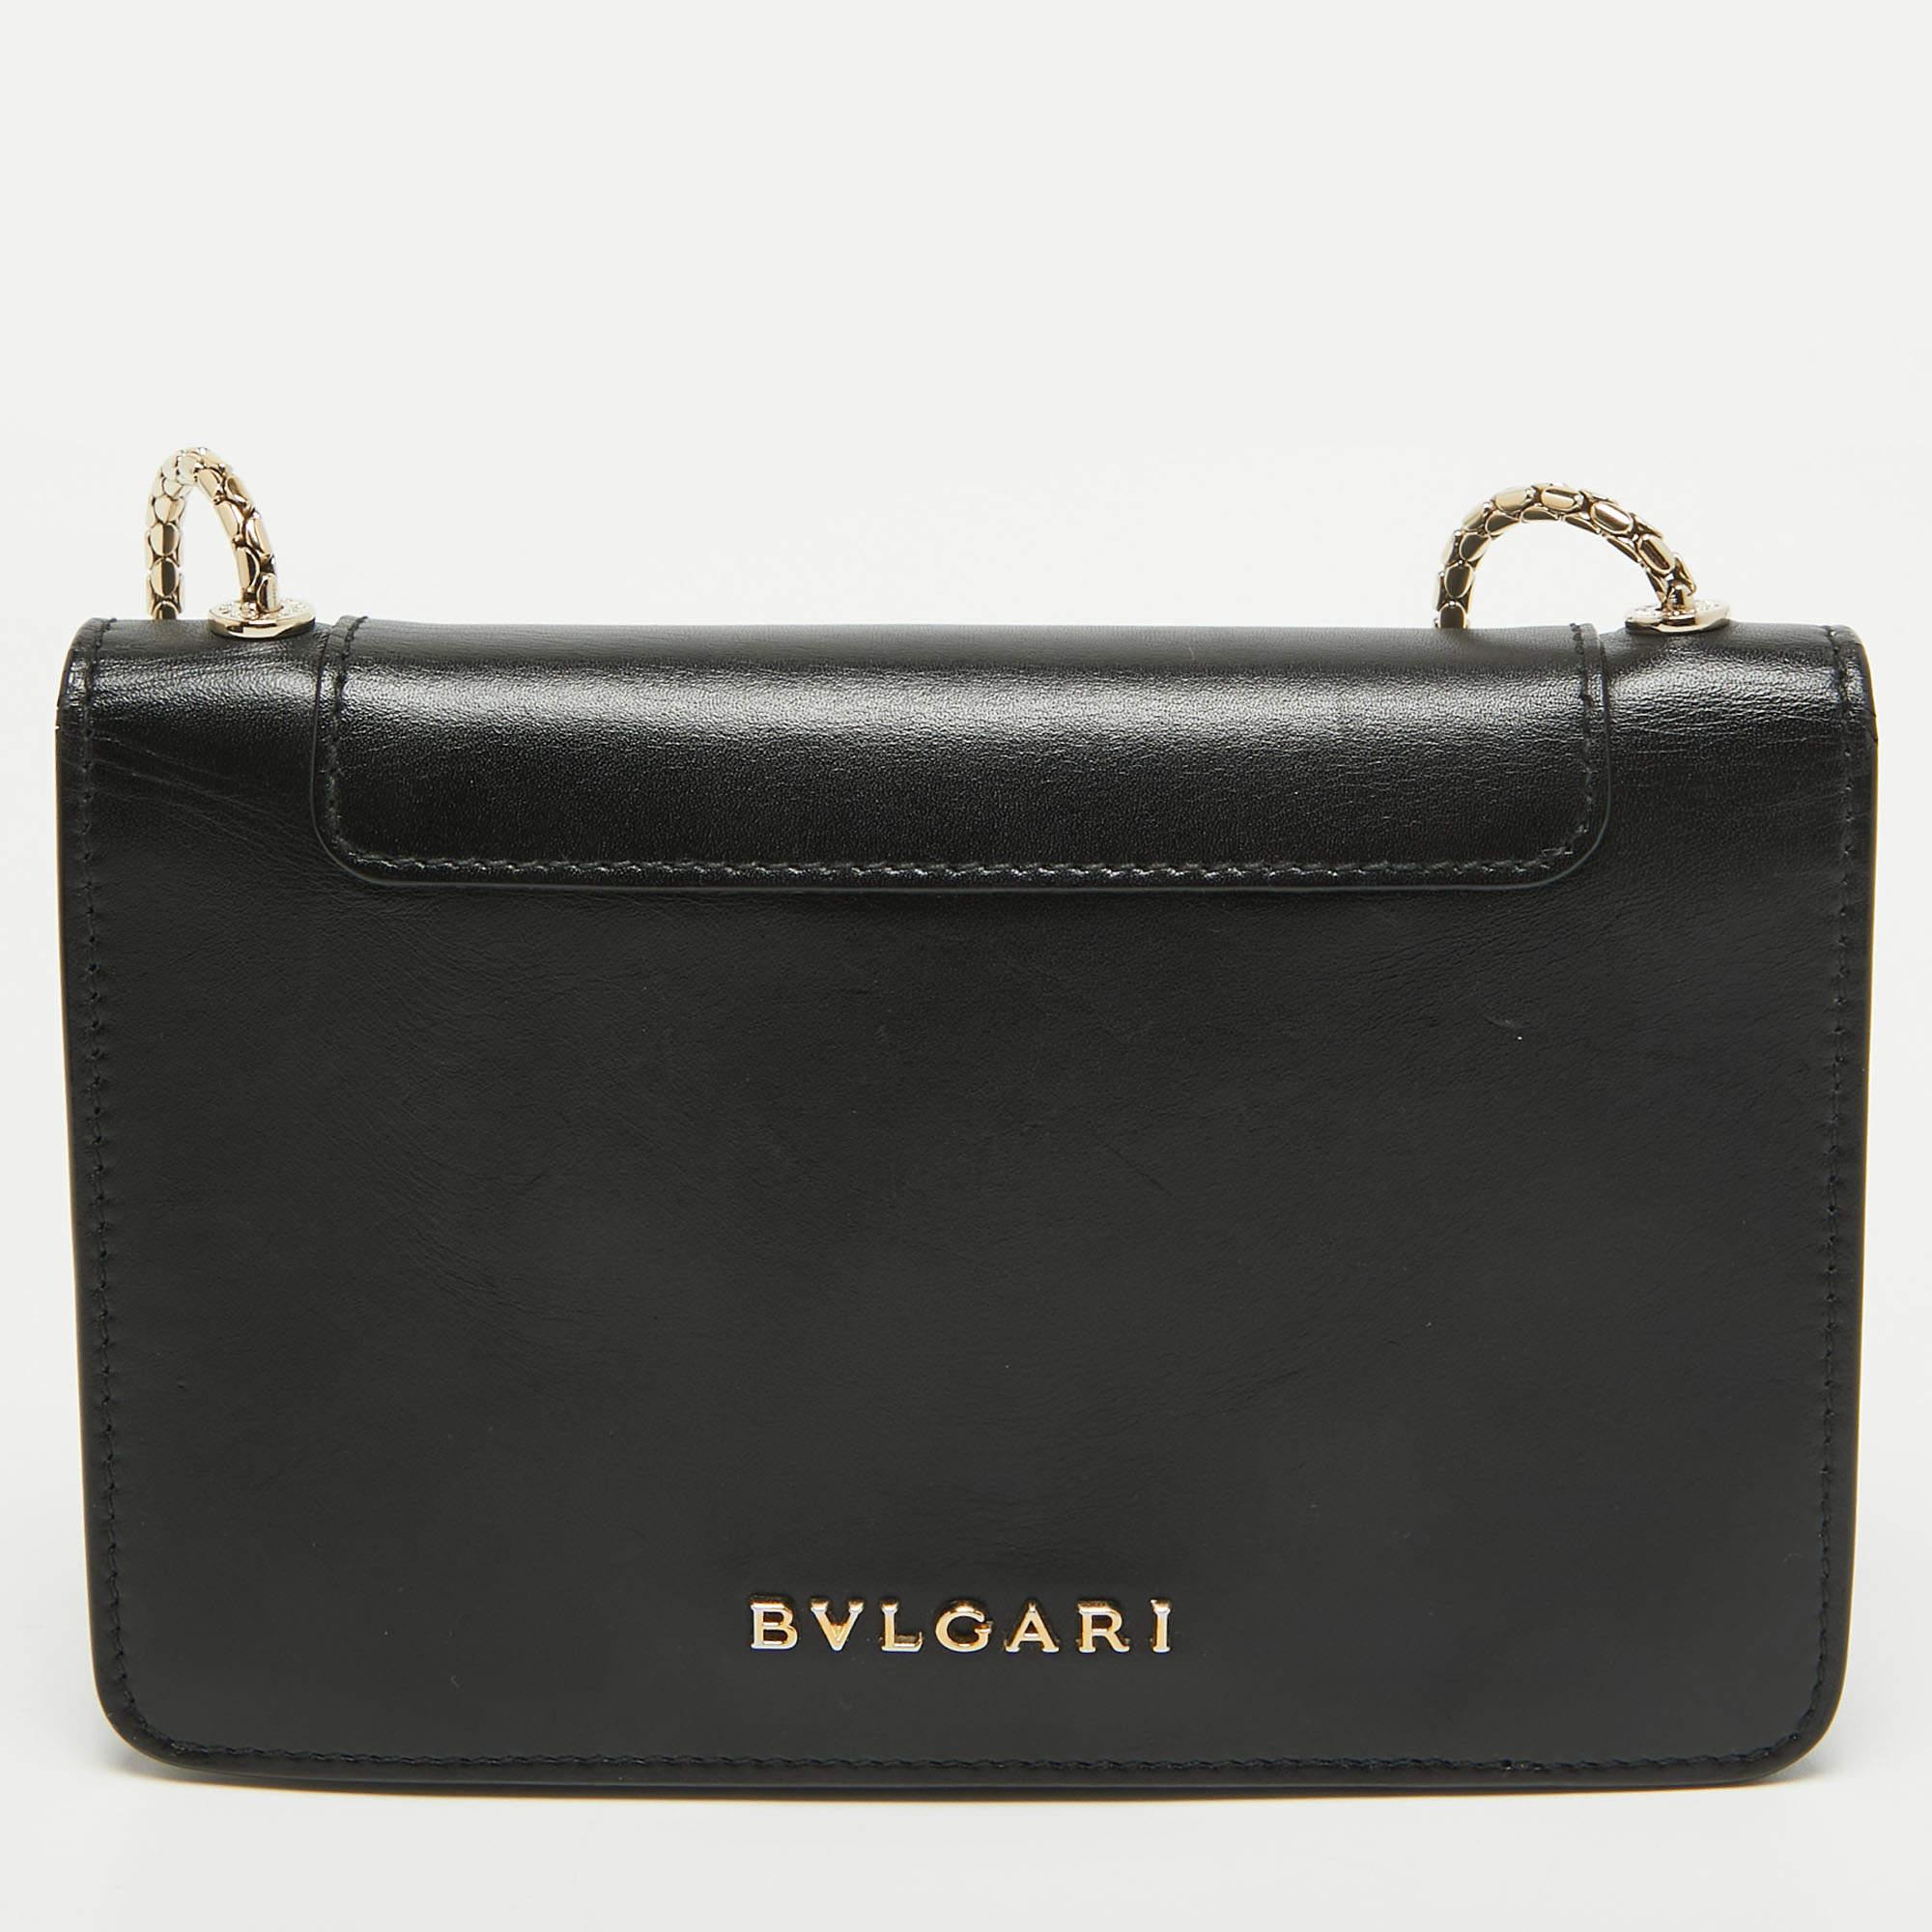 Most designs from Bvlgari, with their striking elements, pay tribute to the Roman roots, and this bag is no different. Made from leather, it is an accessory of utility and luxury. Perfectly sized, the interior has enough room to dutifully store your